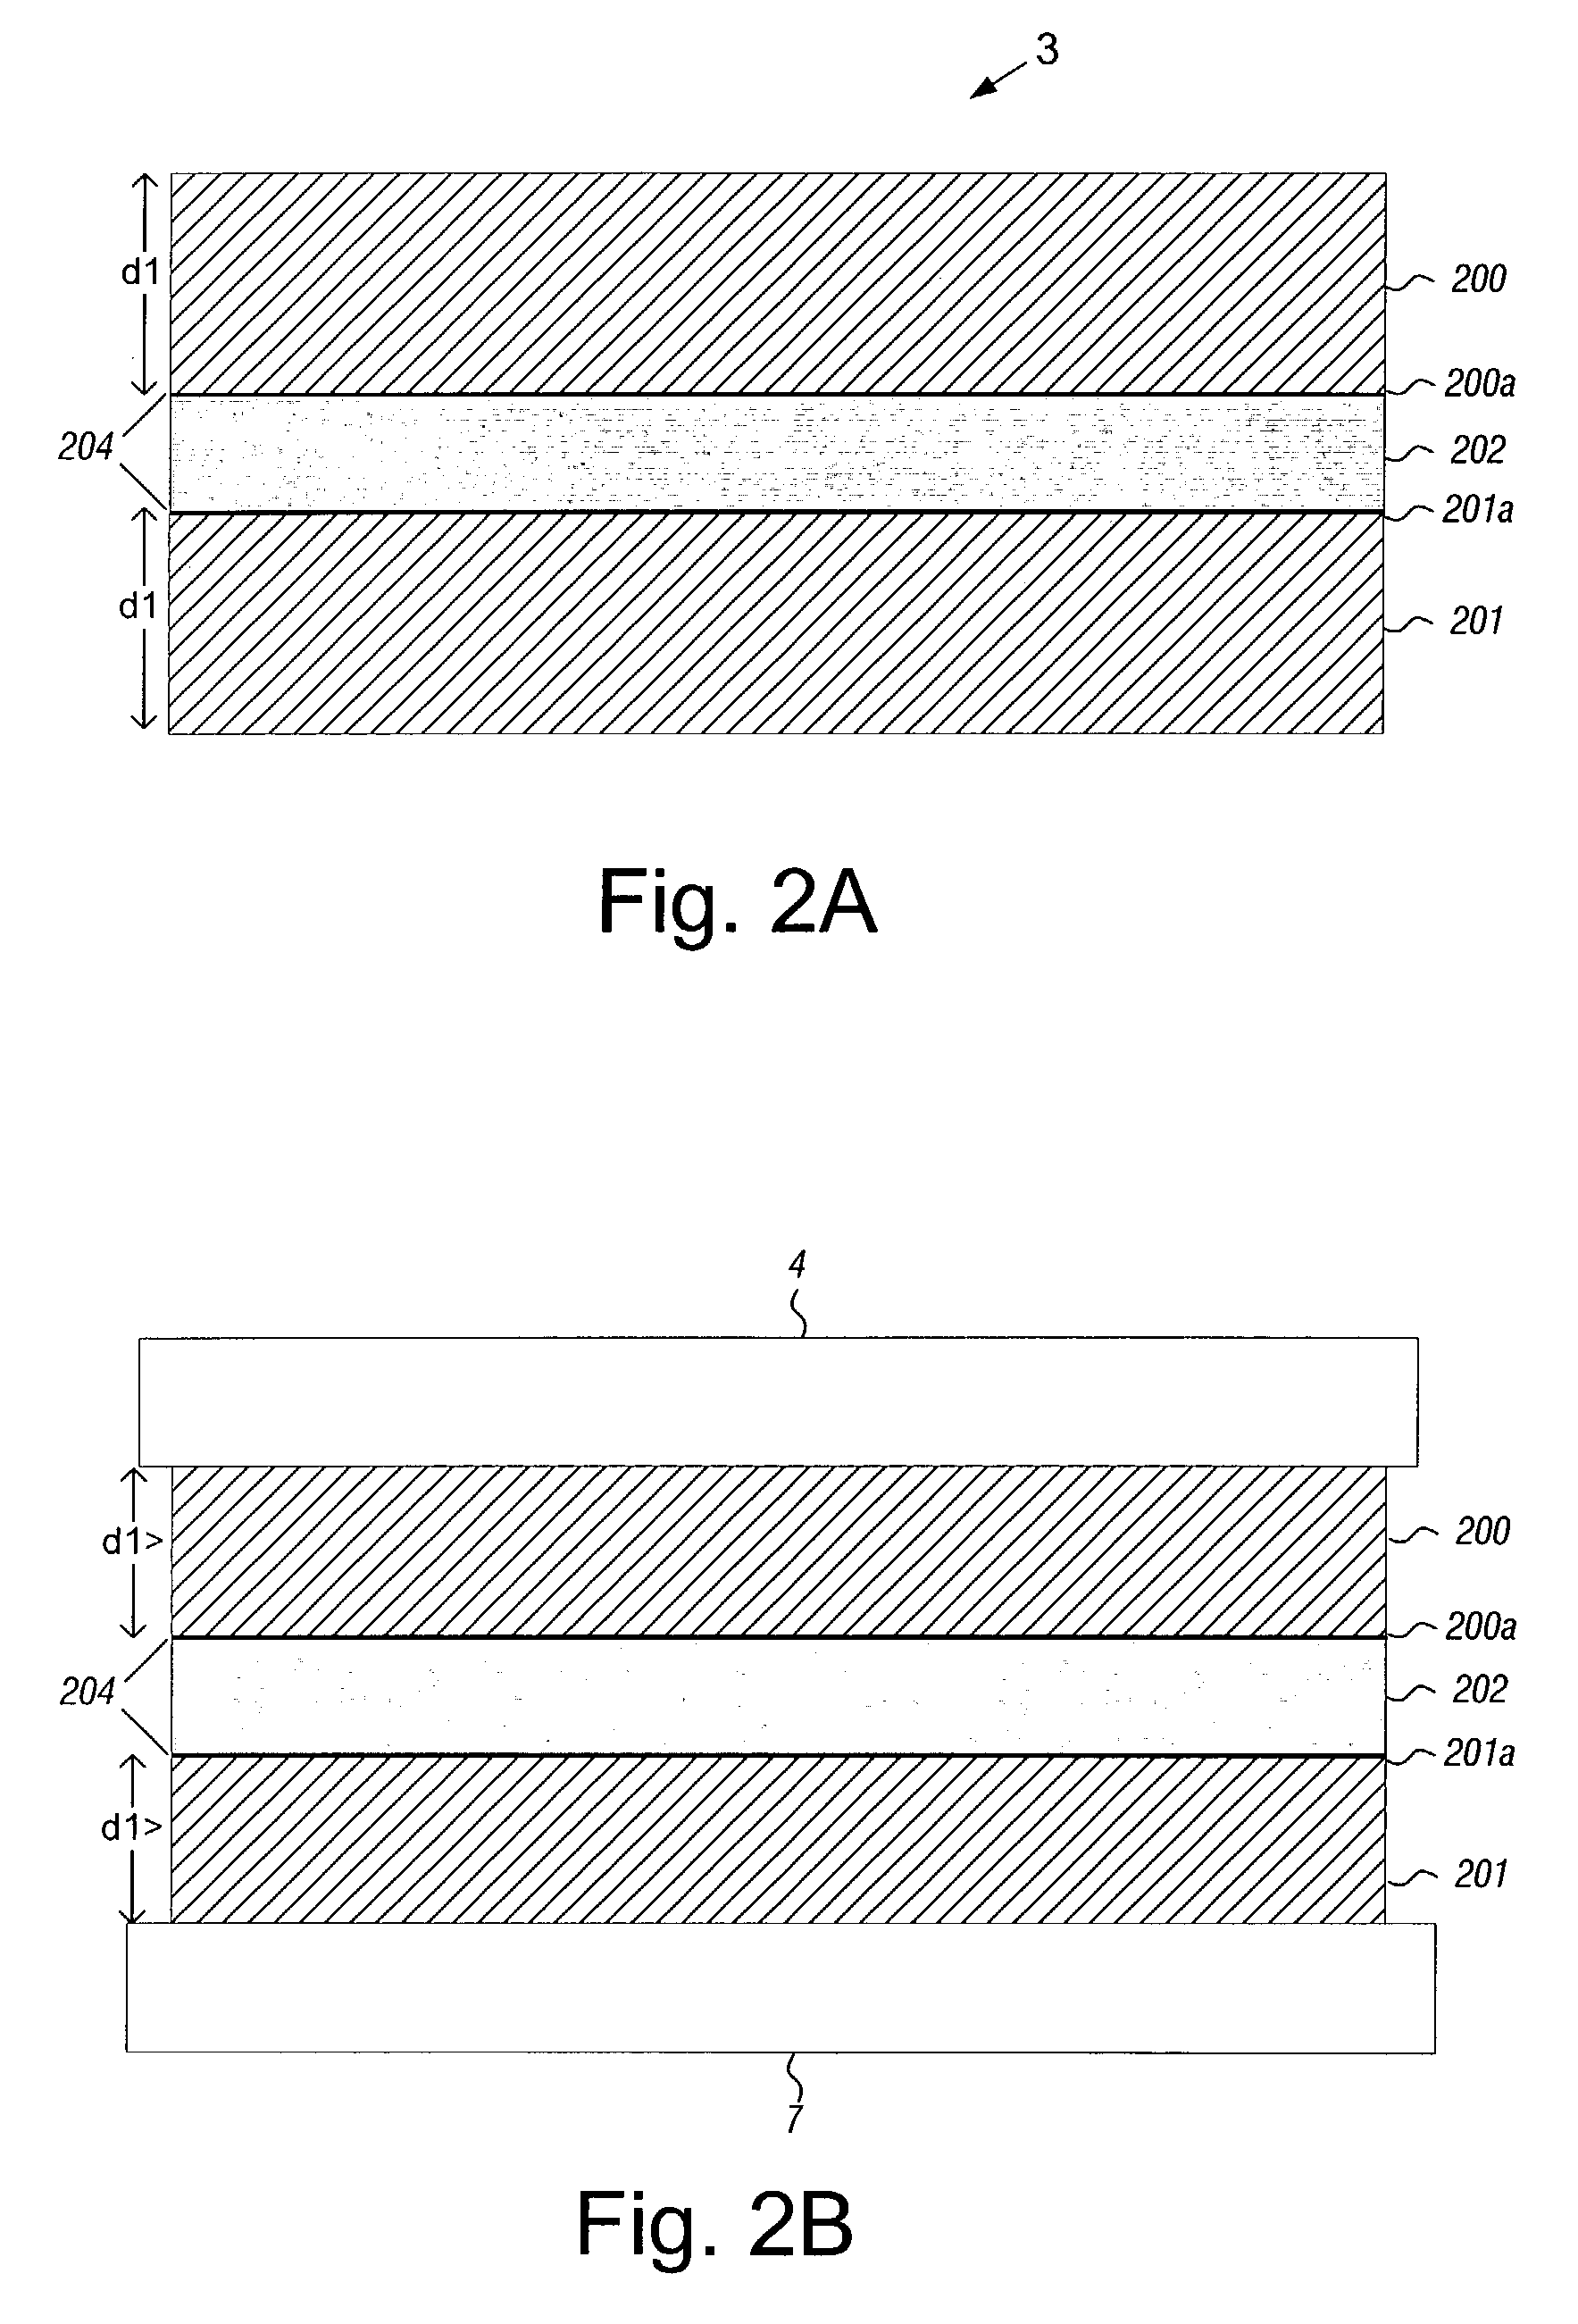 Disk drive having an acoustic damping shield assembly with an acoustic barrier layer